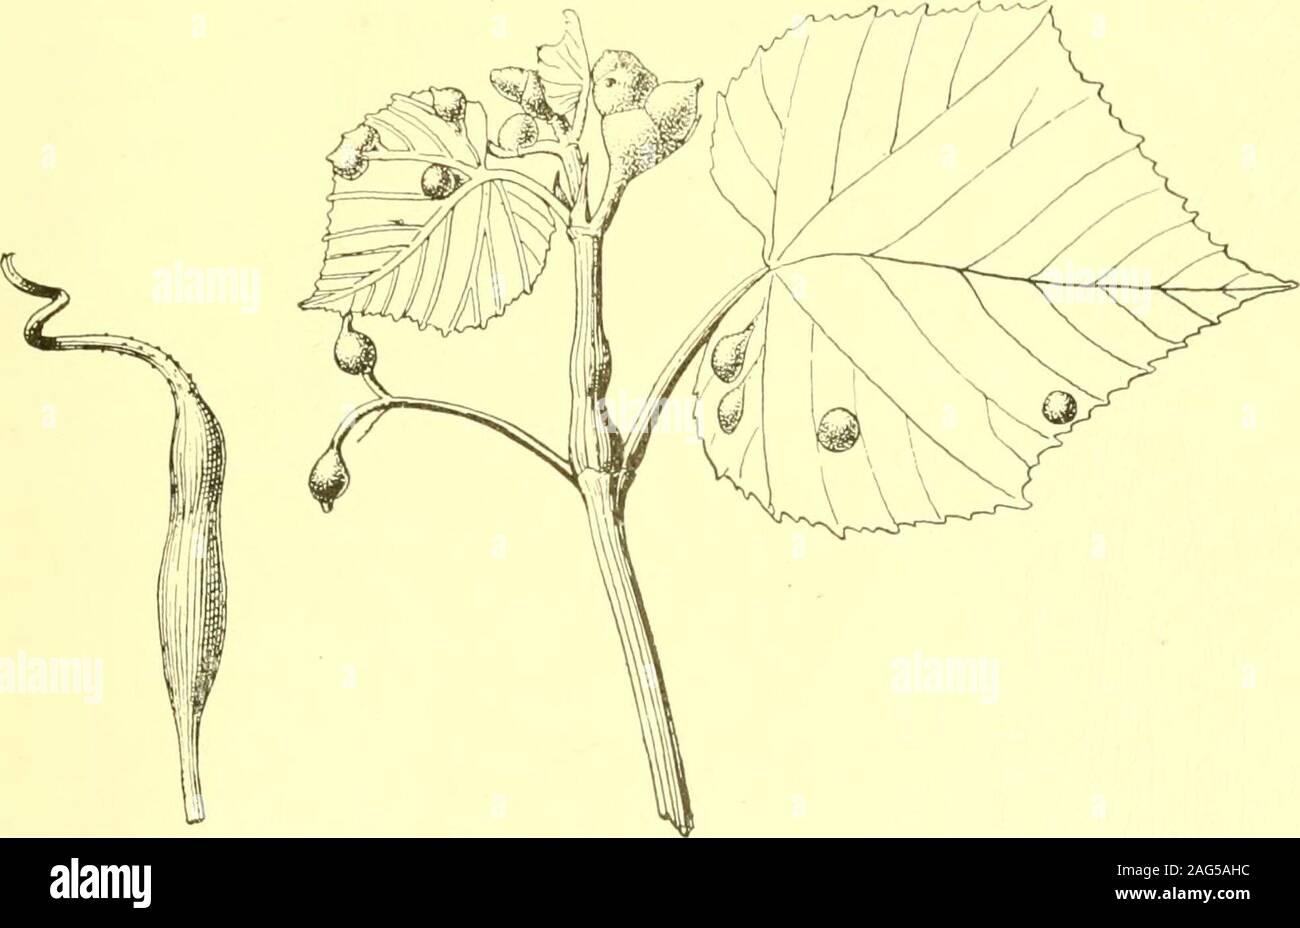 . Report of the State Entomologist on injurious and other insects of the state of New York. Fig. 171. Woodbine vein gall, Dasyneura par thenocissi Stebb. (Authors illustrati Clustered, fusiform, woolly, pubescent bud galls, each i to 1.5 cm long. PI. 13,fig. 6. Felt i6d, p. 107 Itonid. Grape filbert gall, Schizomyia coryloides Walsh & Riley KEY TO AMERICAN INSECT GALLS 167 Leaf or tendril galls Oval, petiole or tendril ^^all, length 2.5 cm, swelling mostly distant from thebase. Felt, i6d, p. 1 i,^ Itonid. S f h i z o m via ]) e t i o 1 i c o 1 a FeltReared from similar gall. Fig. 172. Felt o8e Stock Photo